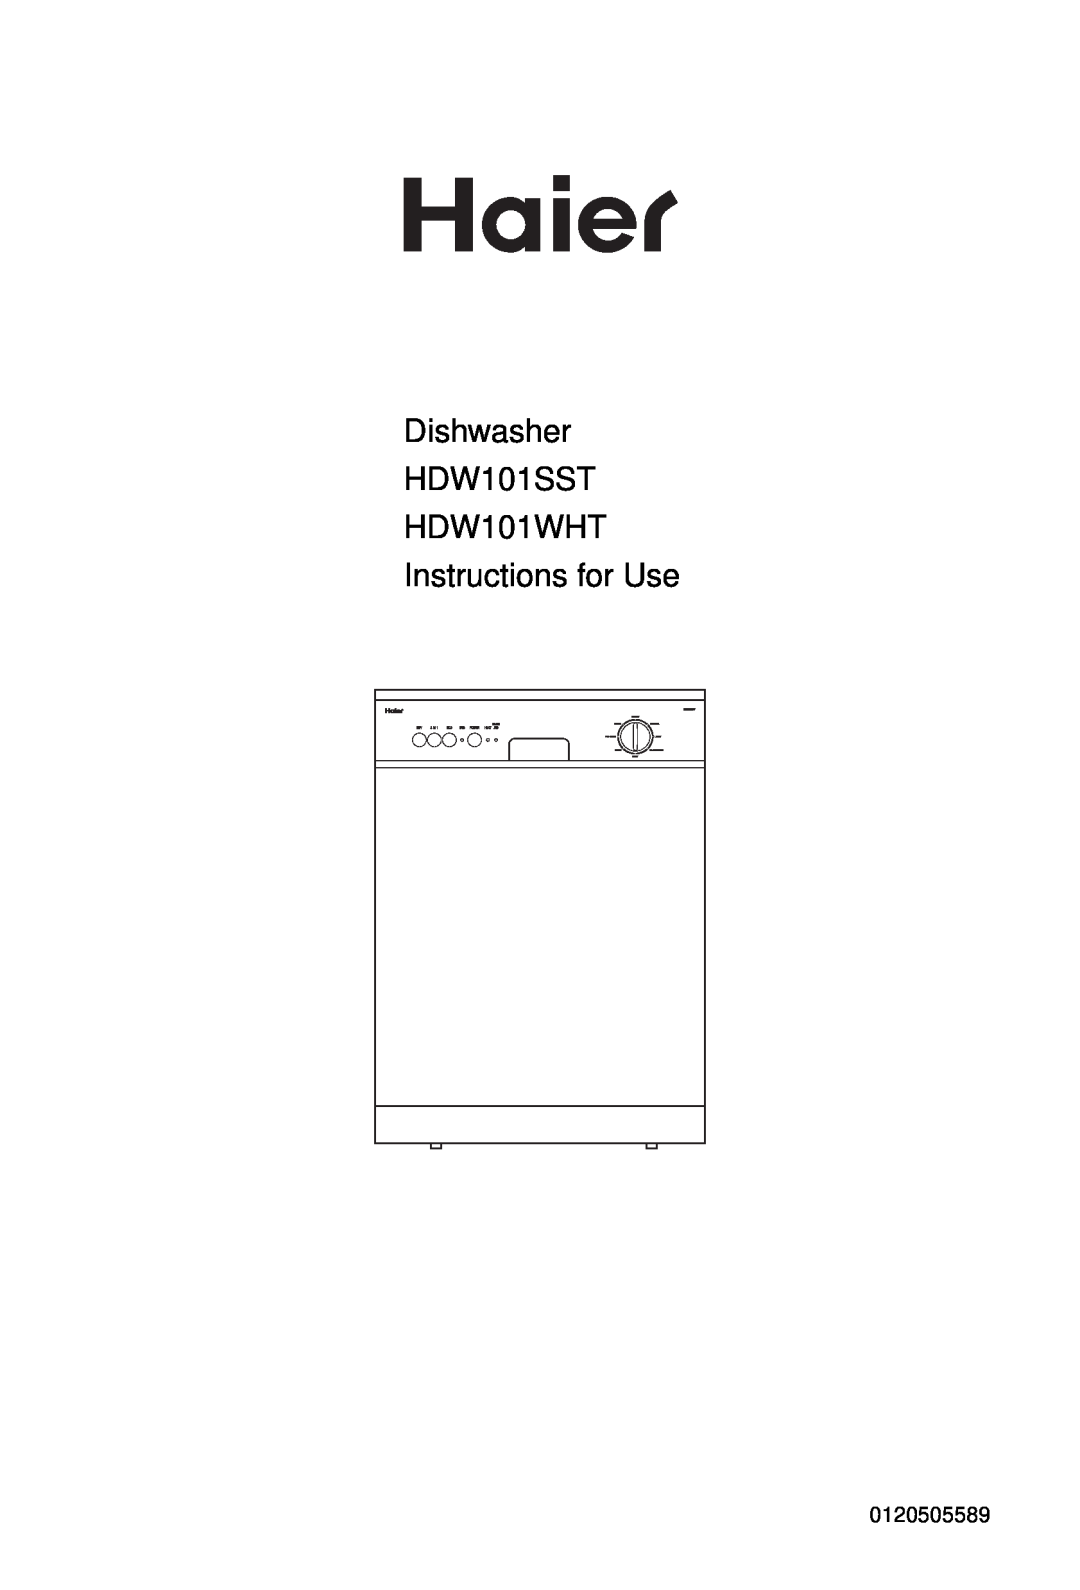 Haier manual Dishwasher HDW101SST HDW101WHT, Instructions for Use, 0120505589 